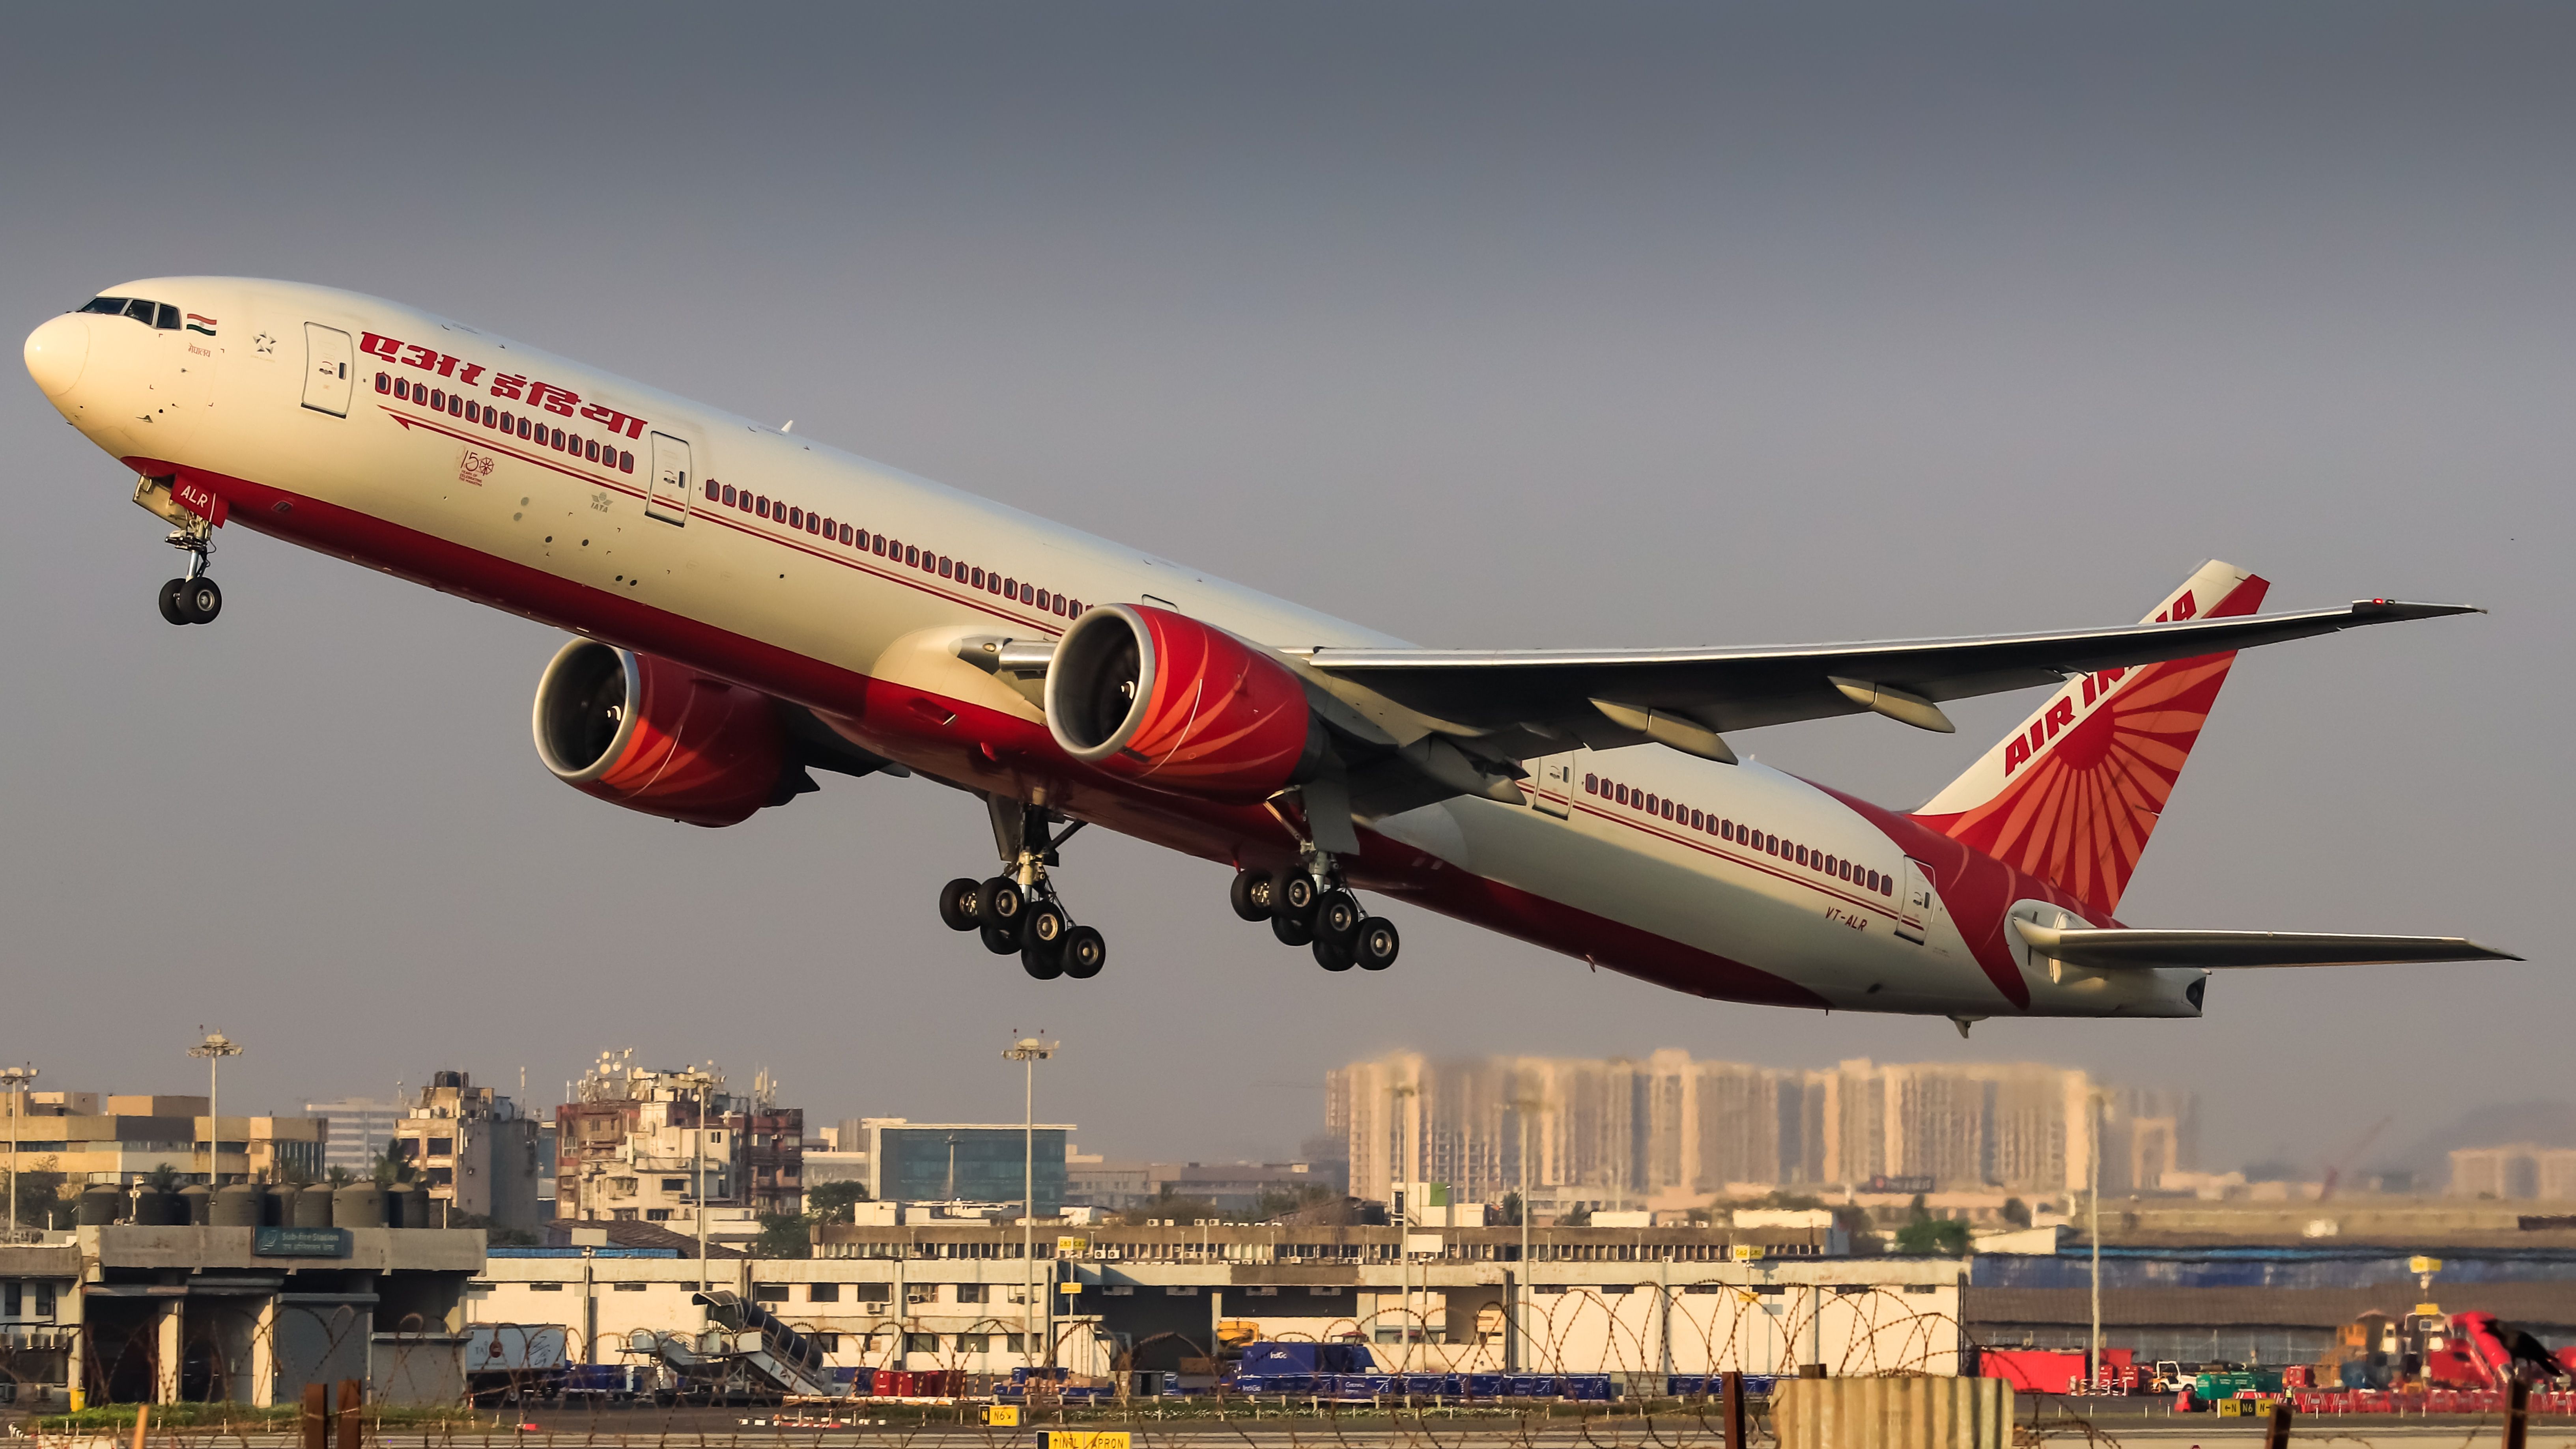 Air India Boeing 777-300ER taking off